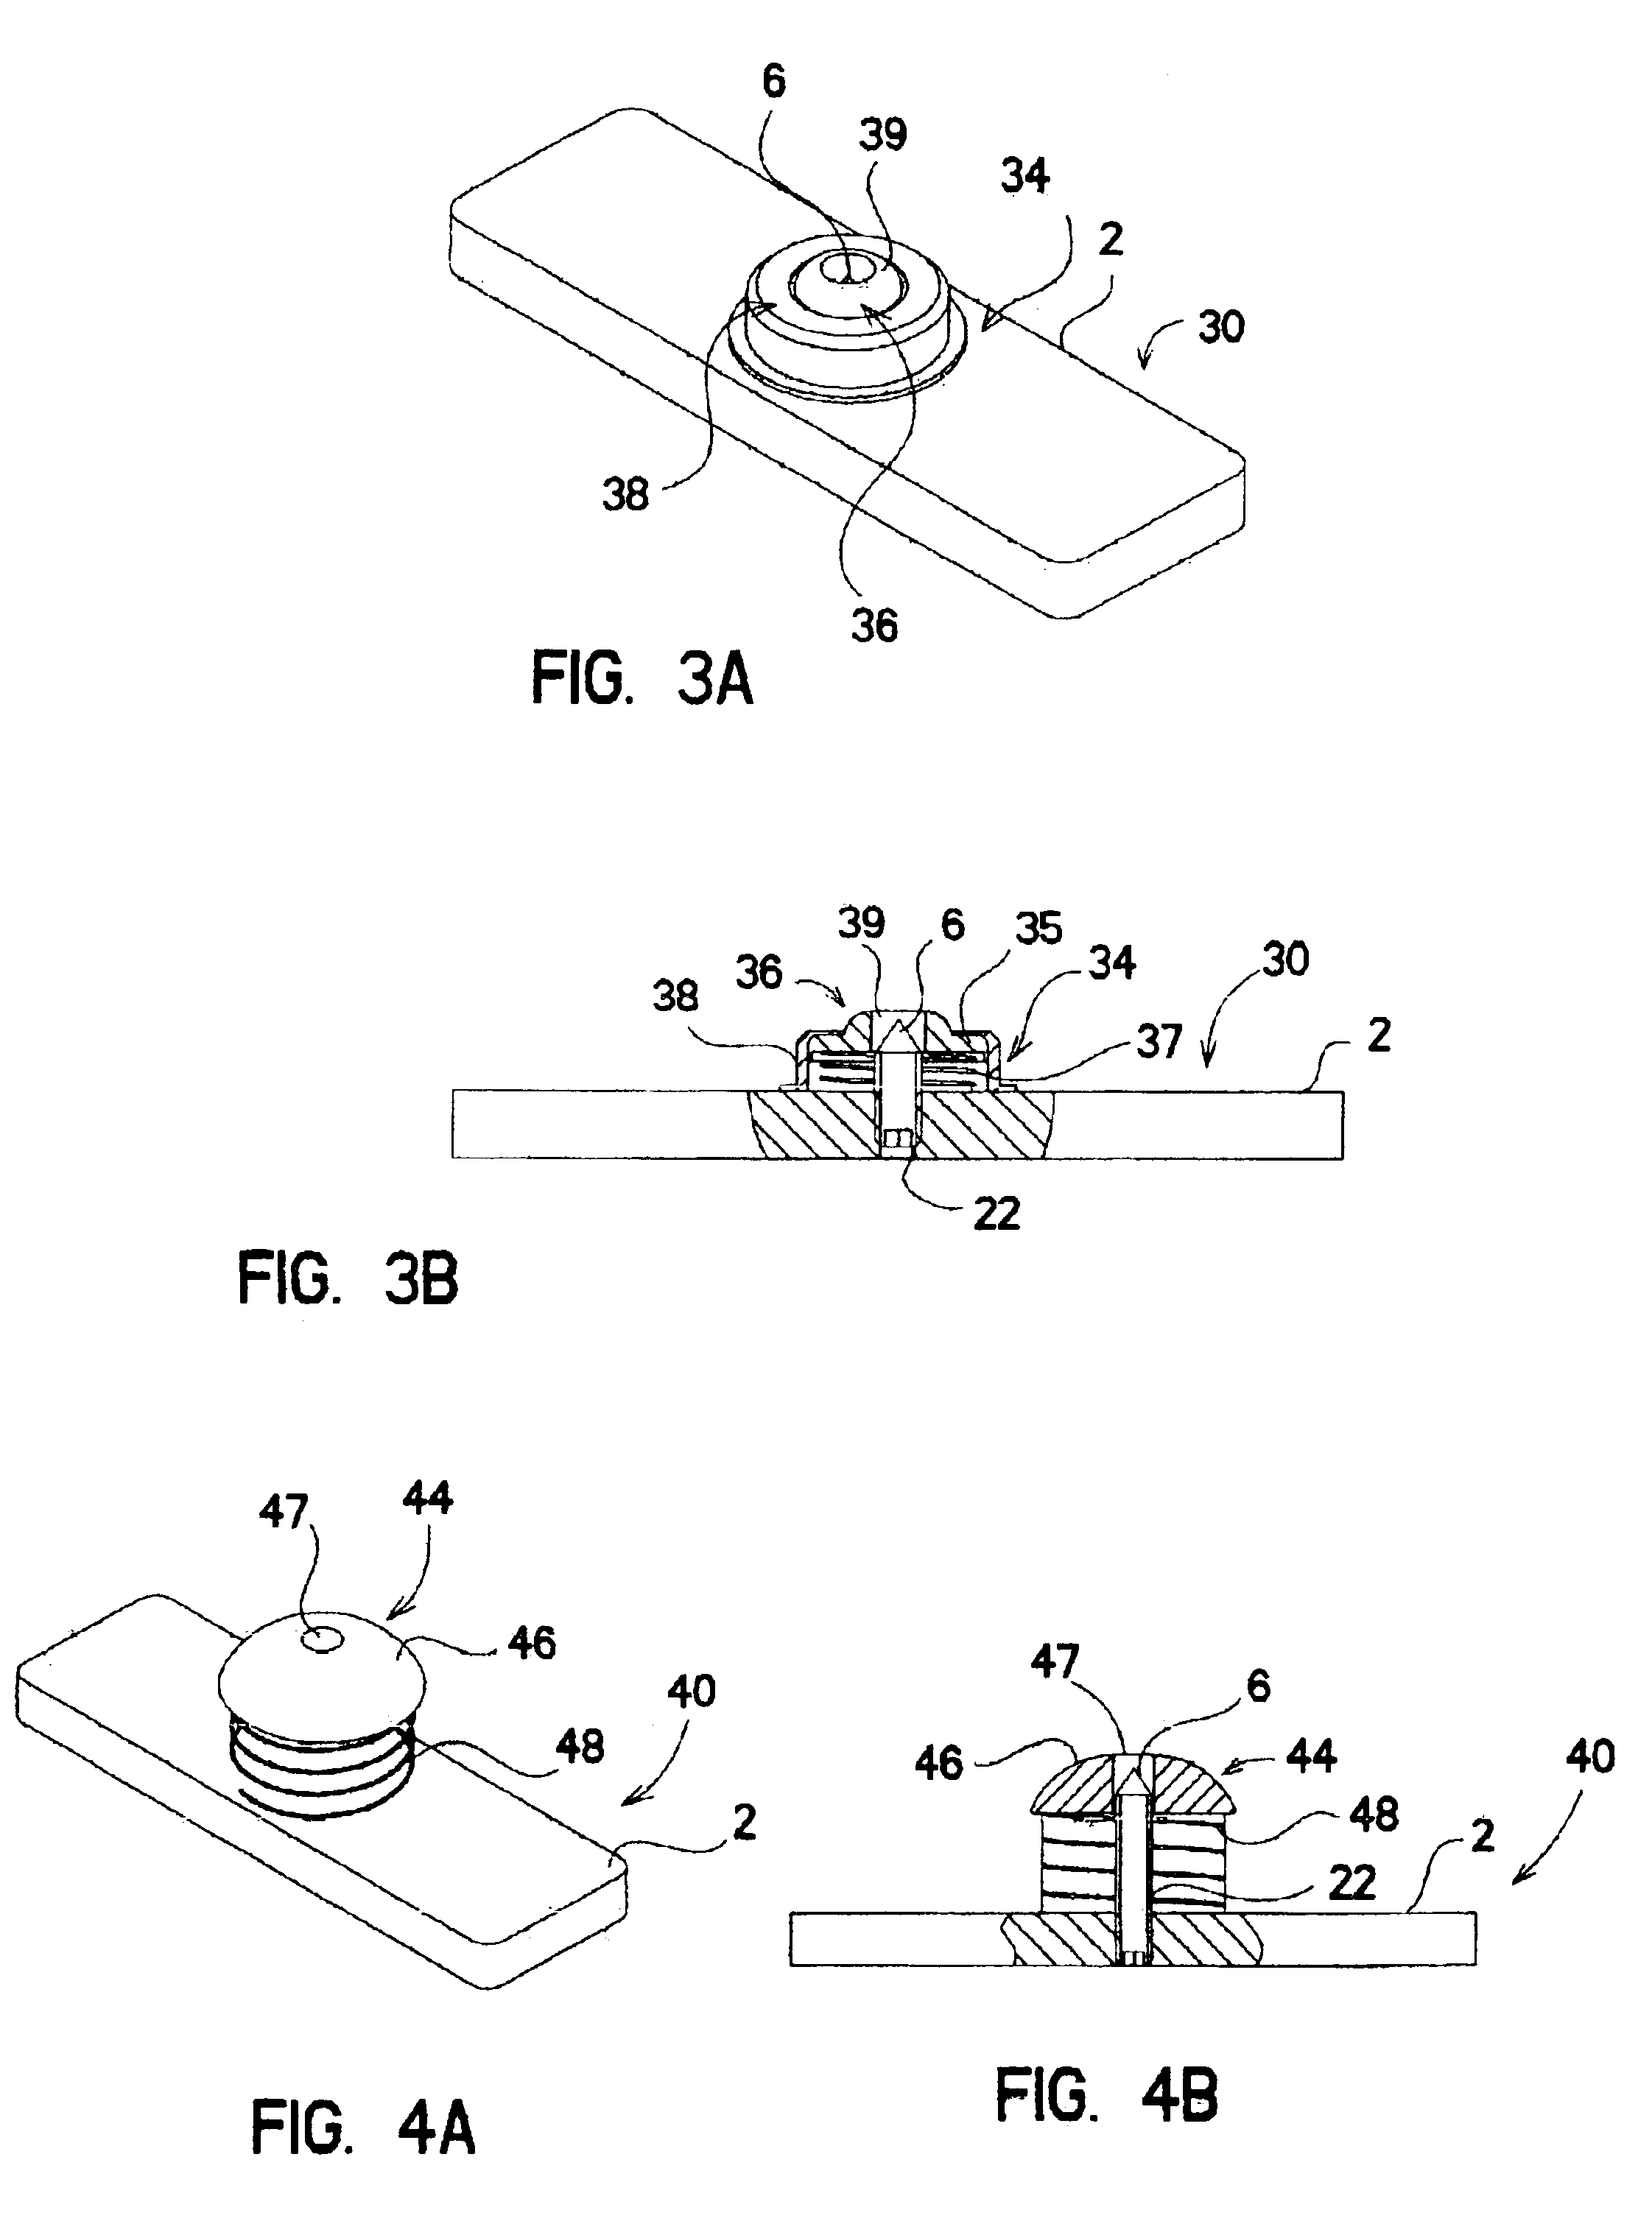 Marking device and method for indicating locations on a support structure for fastener placement and measurement